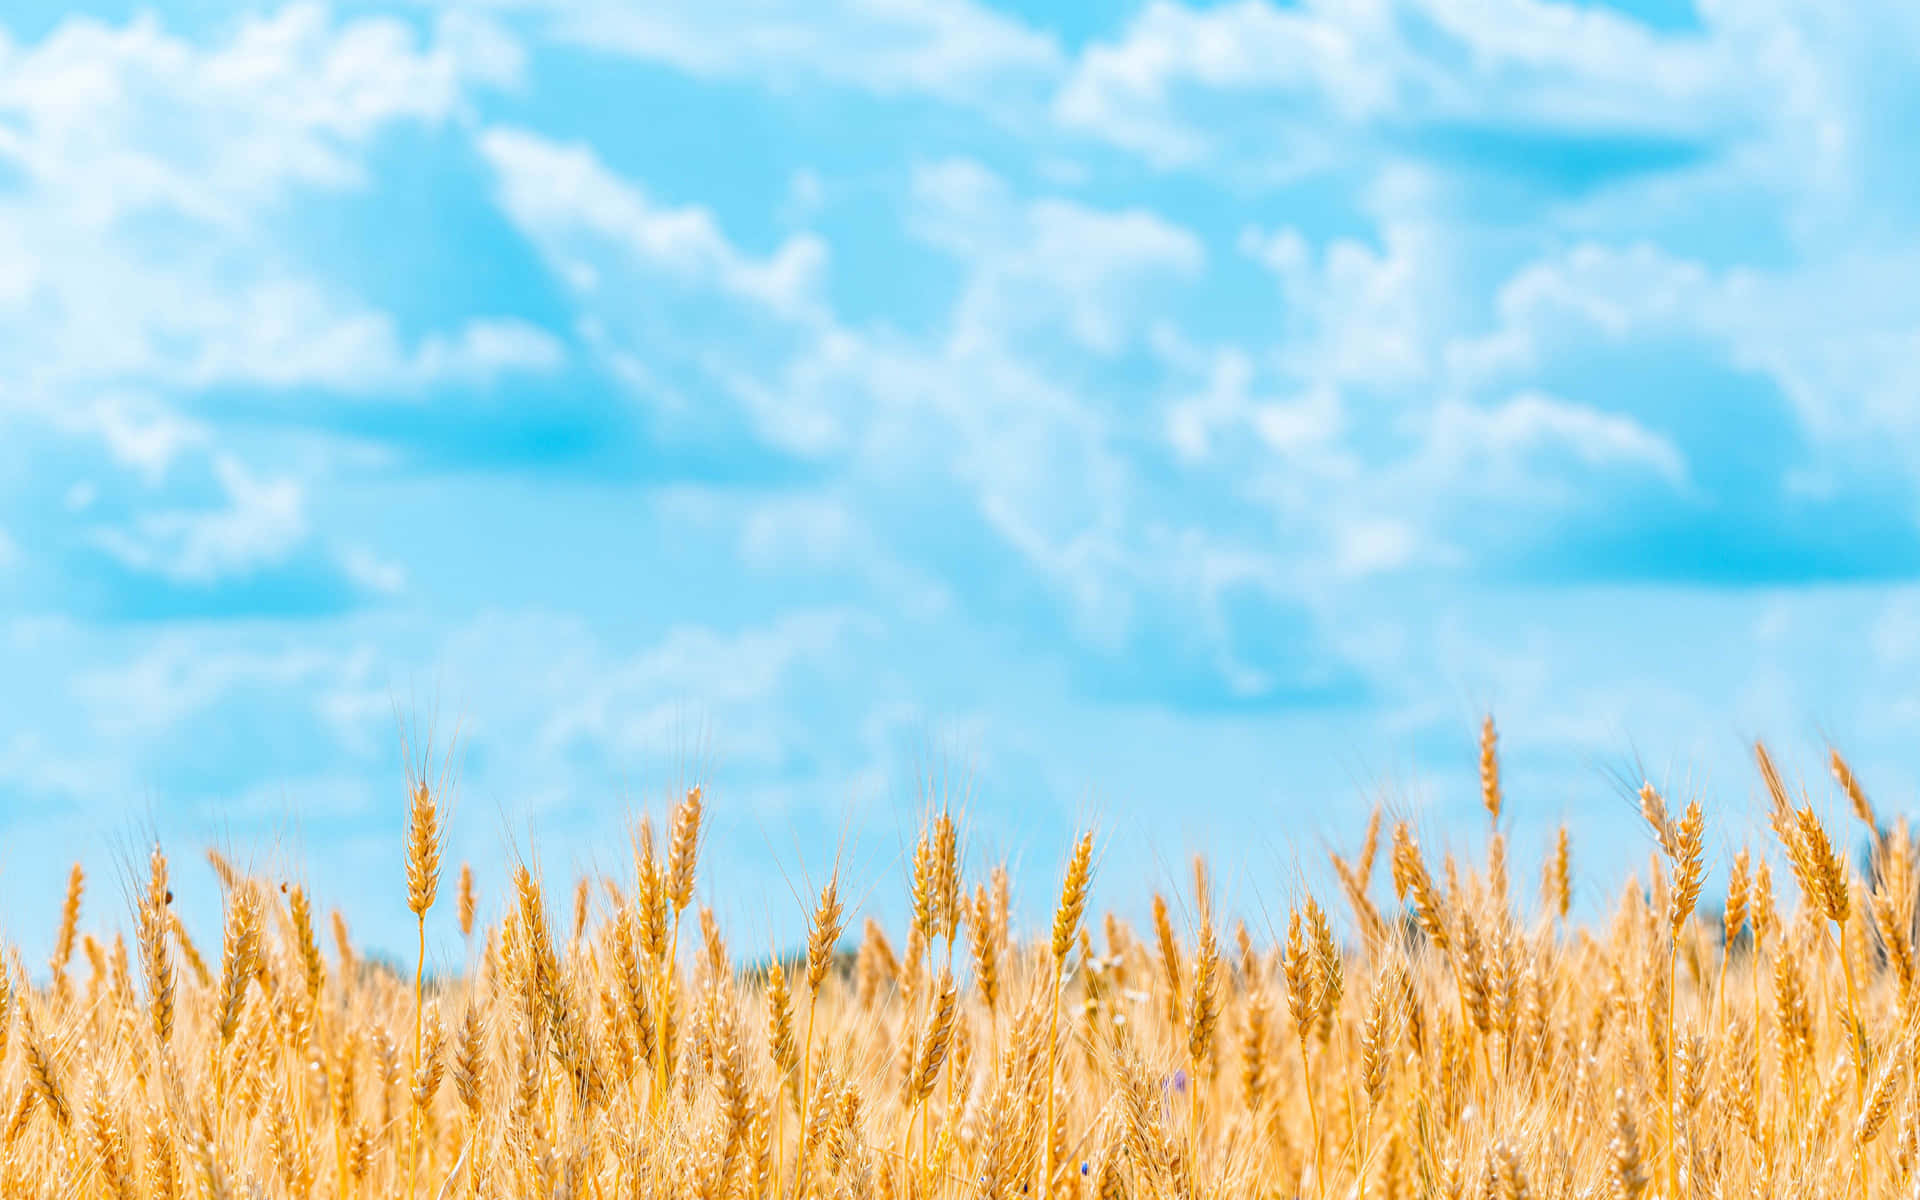 A field of golden wheat blowing in the breeze